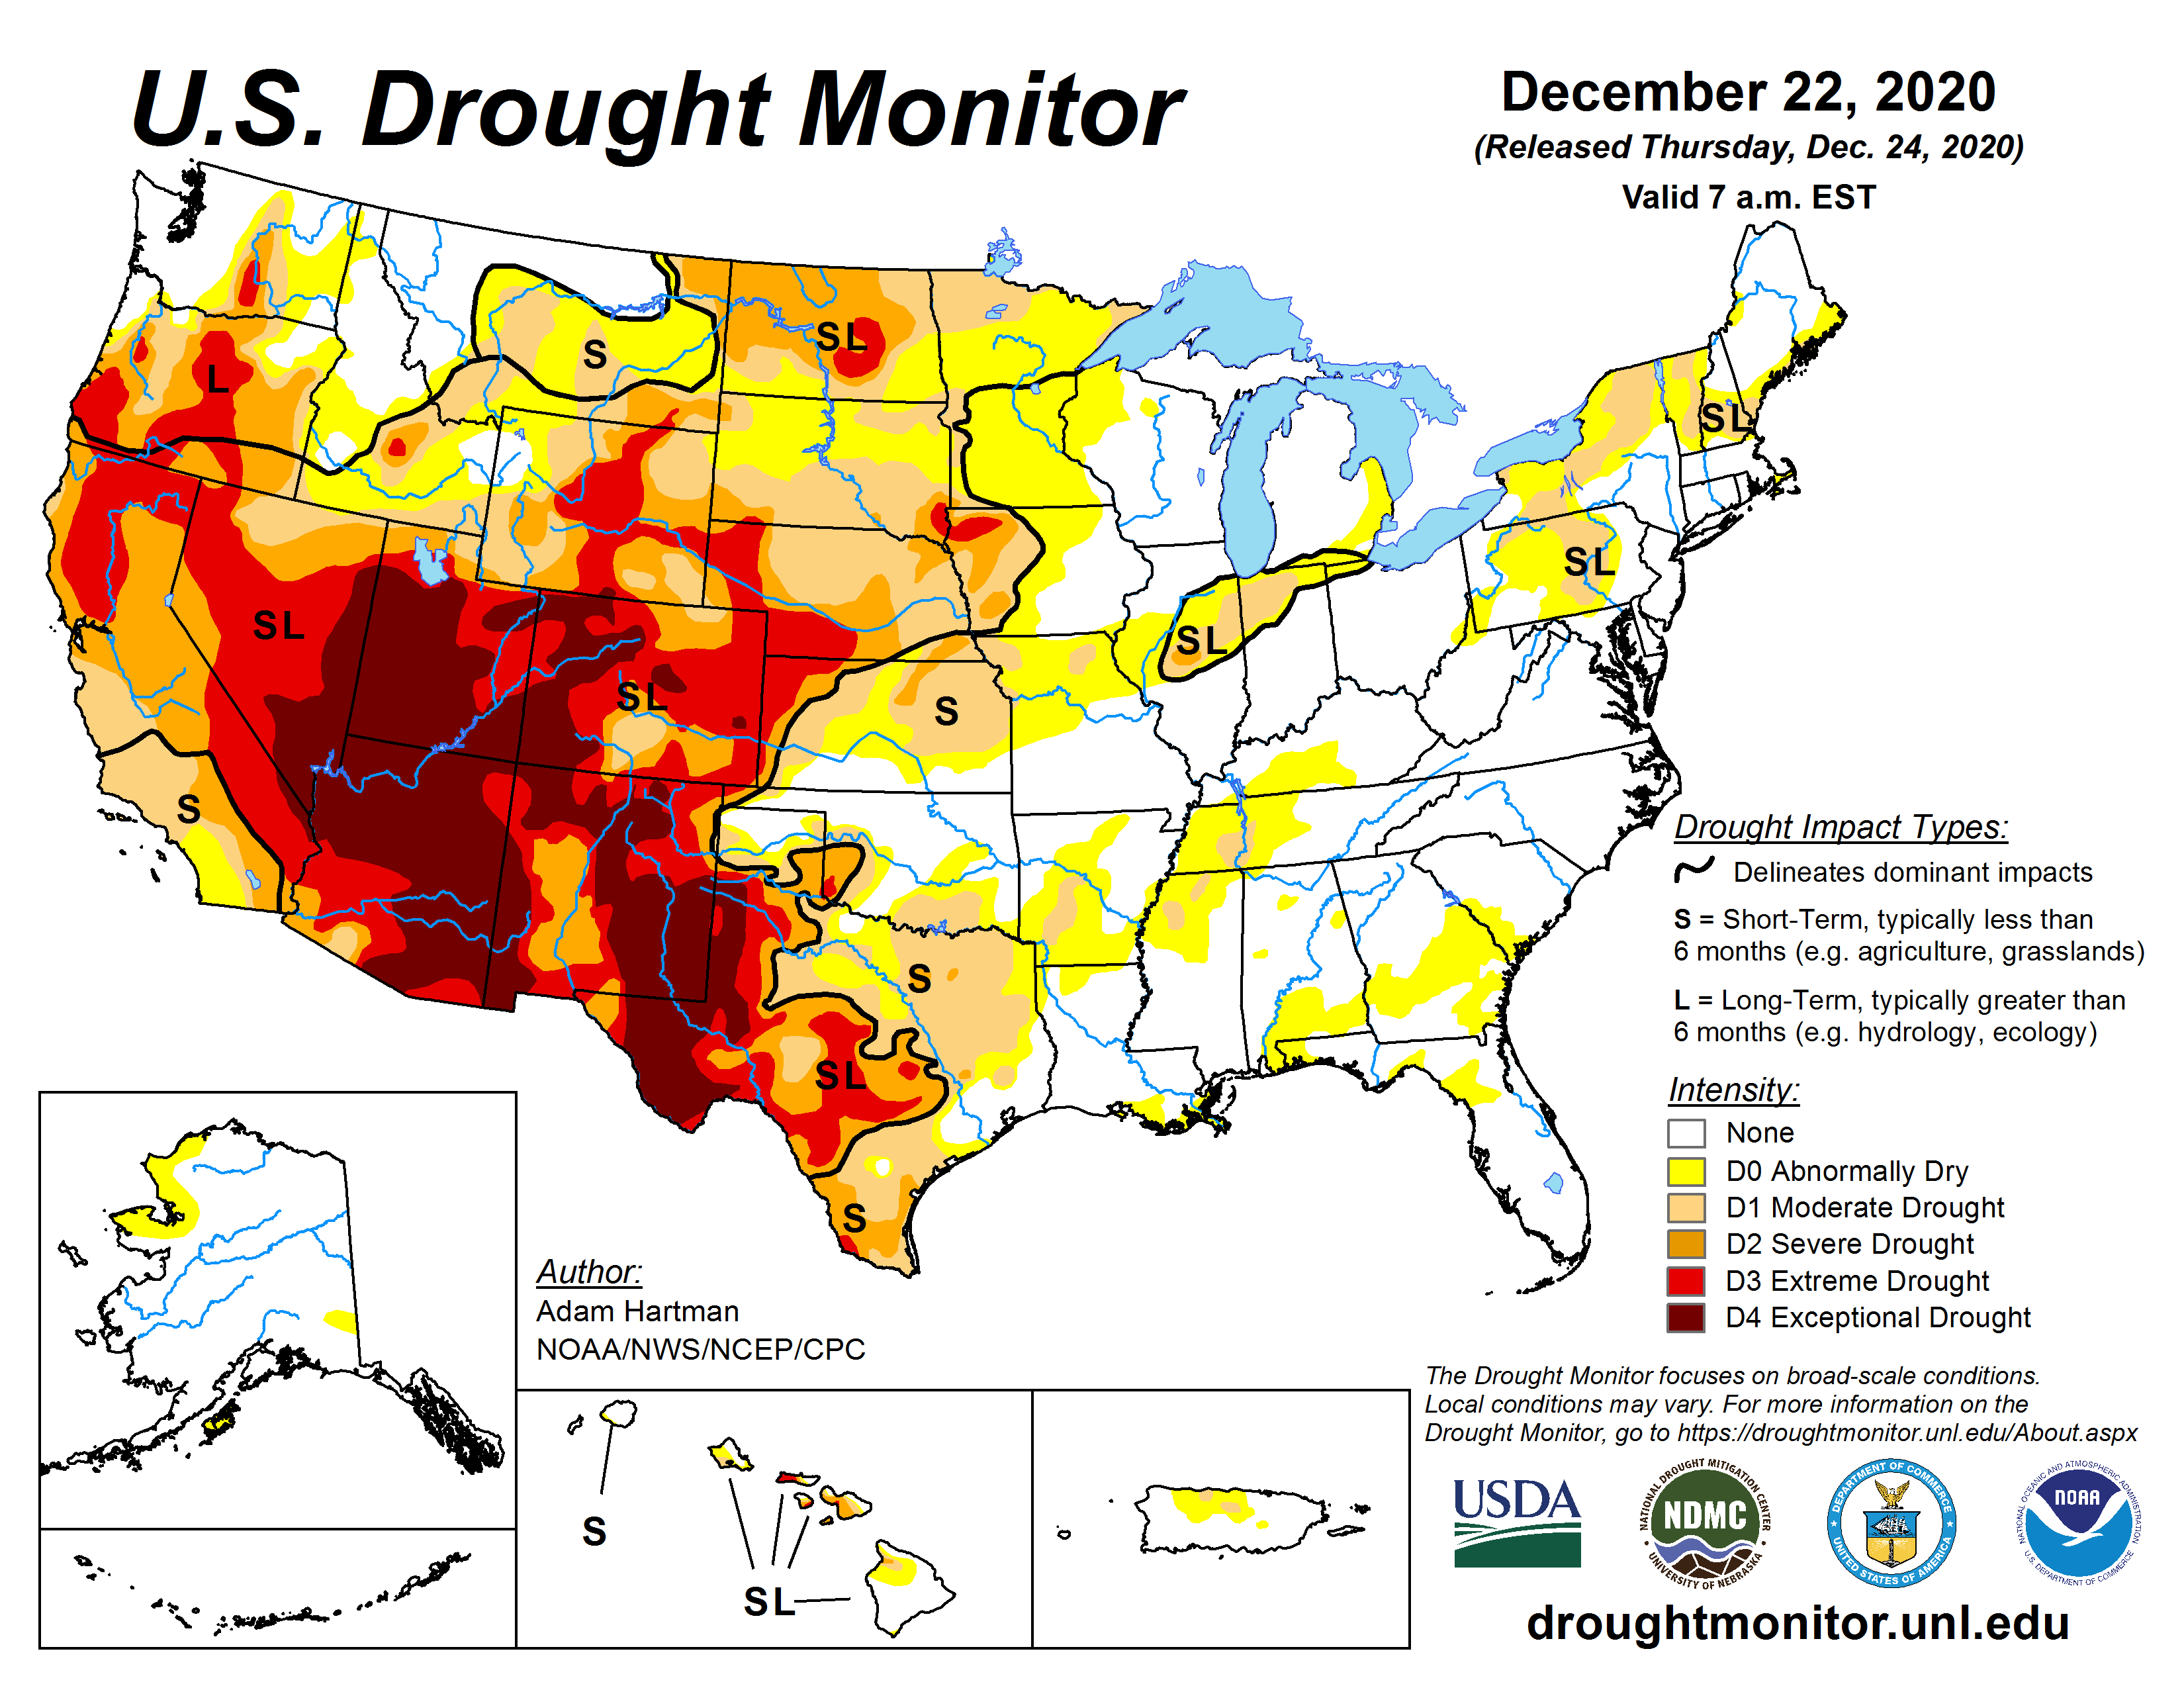 U.S. Drought Monitor map for the U.S. and Puerto Rico as of December 22, 2020. Drought and dryness covered almost all of the Great Plains and West.